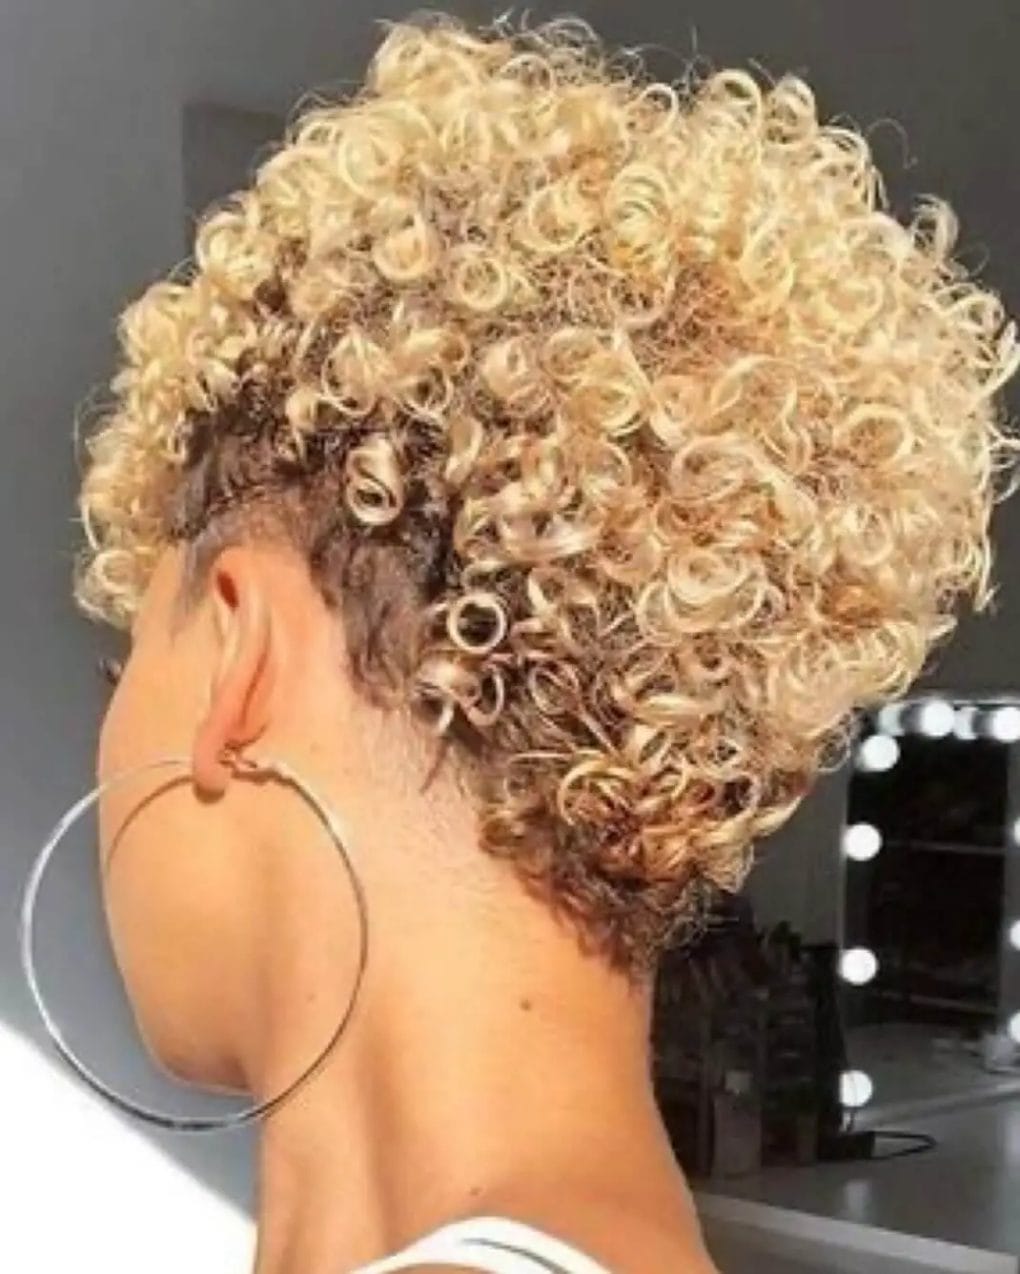 Curly tapered cut with dark roots and golden tips.
